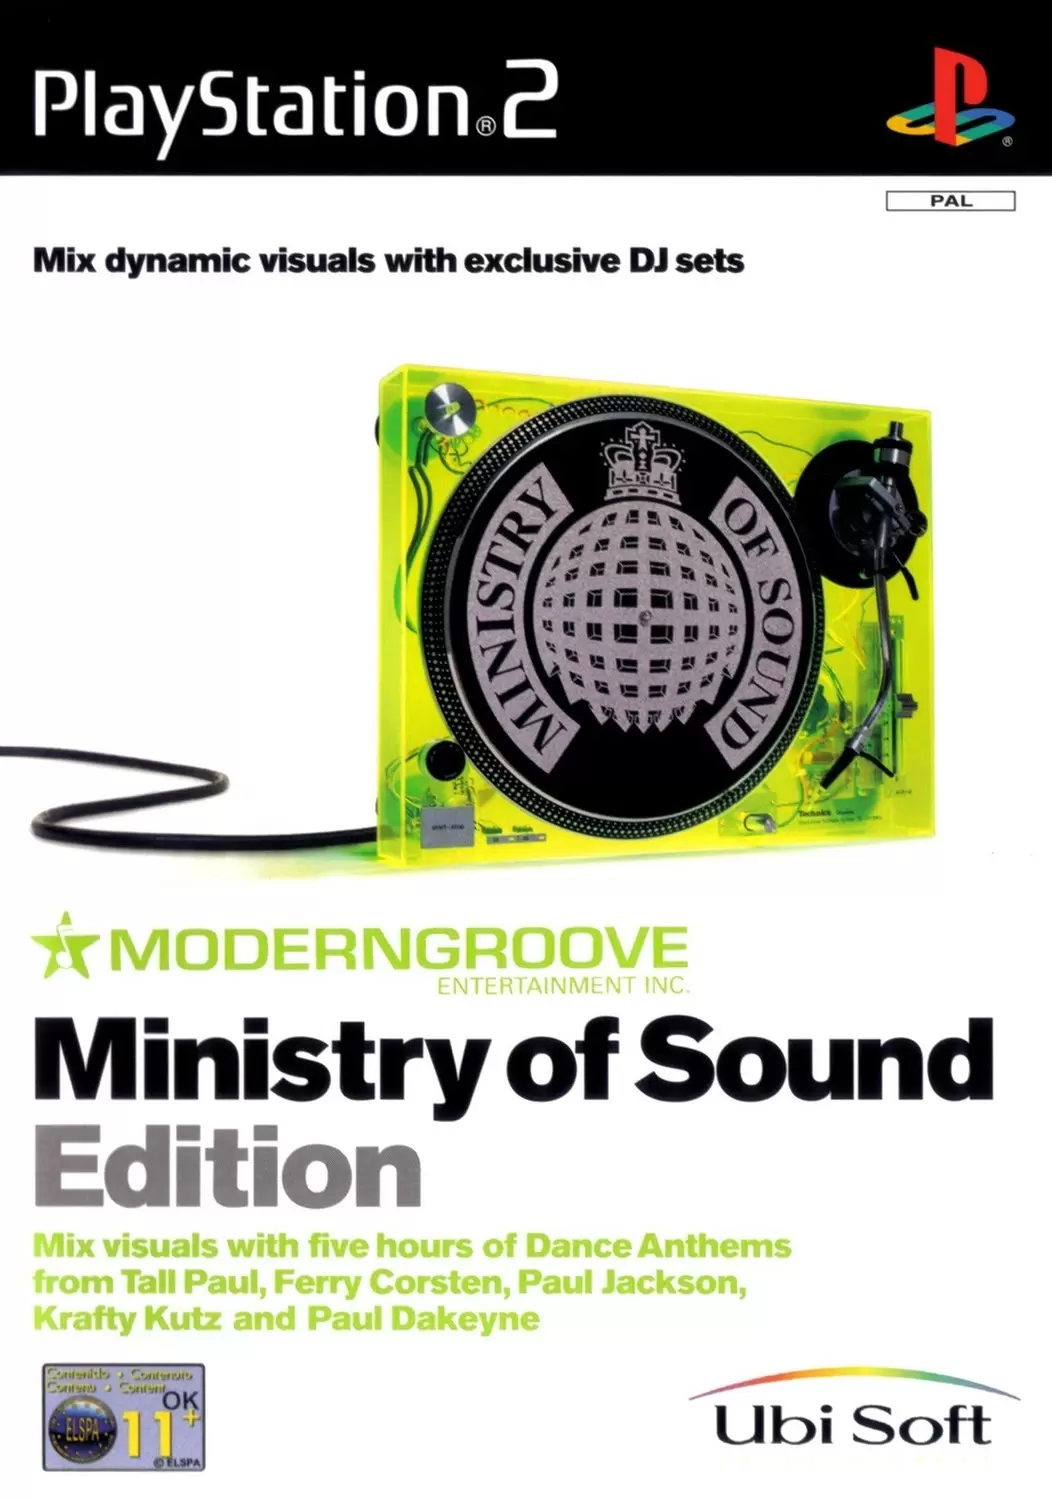 PS2 Games - Moderngroove: Ministry of Sound Edition